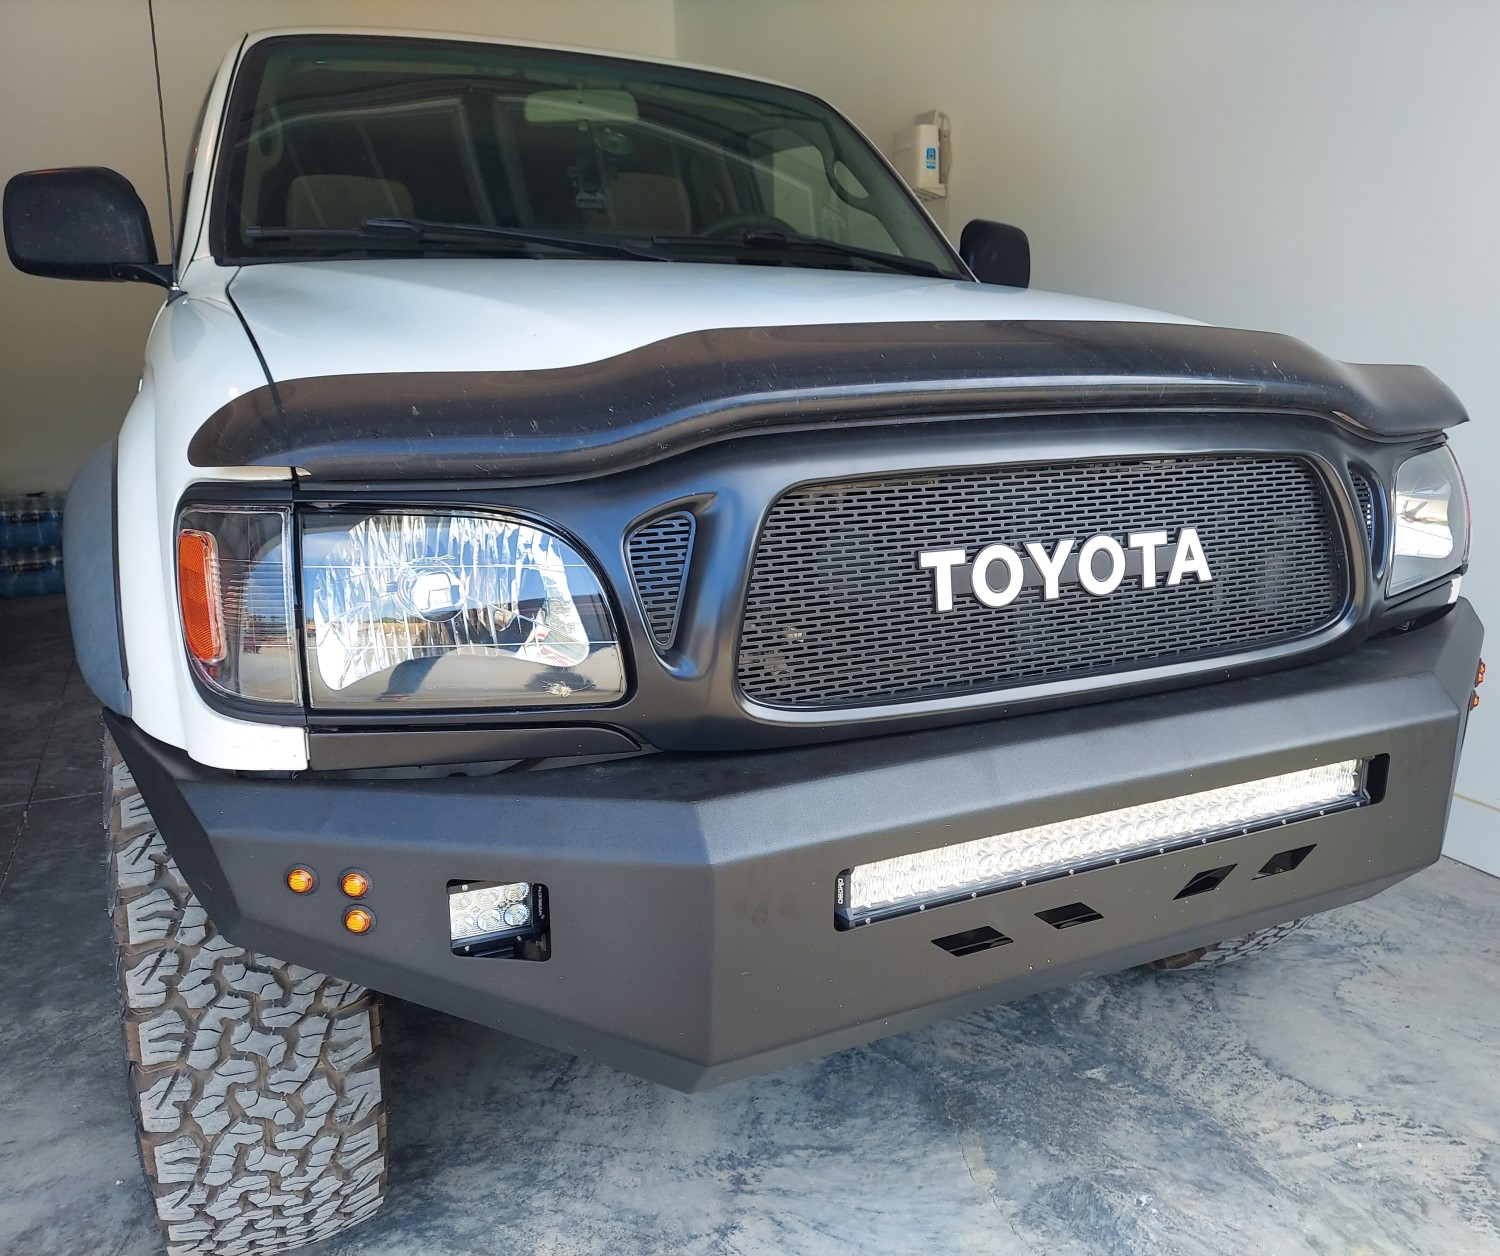 2001 - 2004 Toyota Tacoma Grill Mesh With Toyota Emblem #2